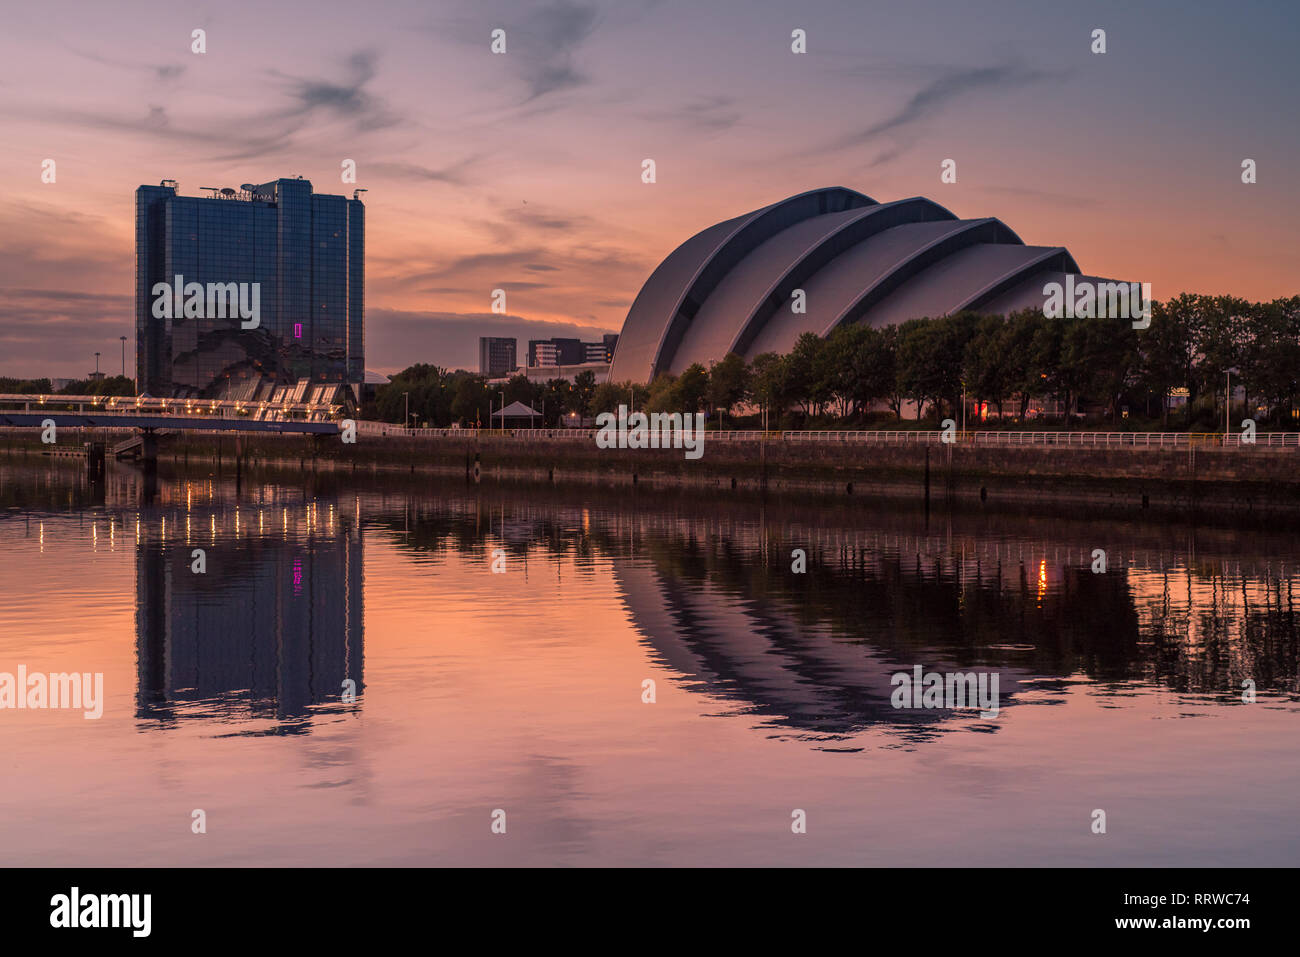 Glasgow/Scotland - September 20 2016: View of the SEC Armadillo from across the Clyde River Stock Photo